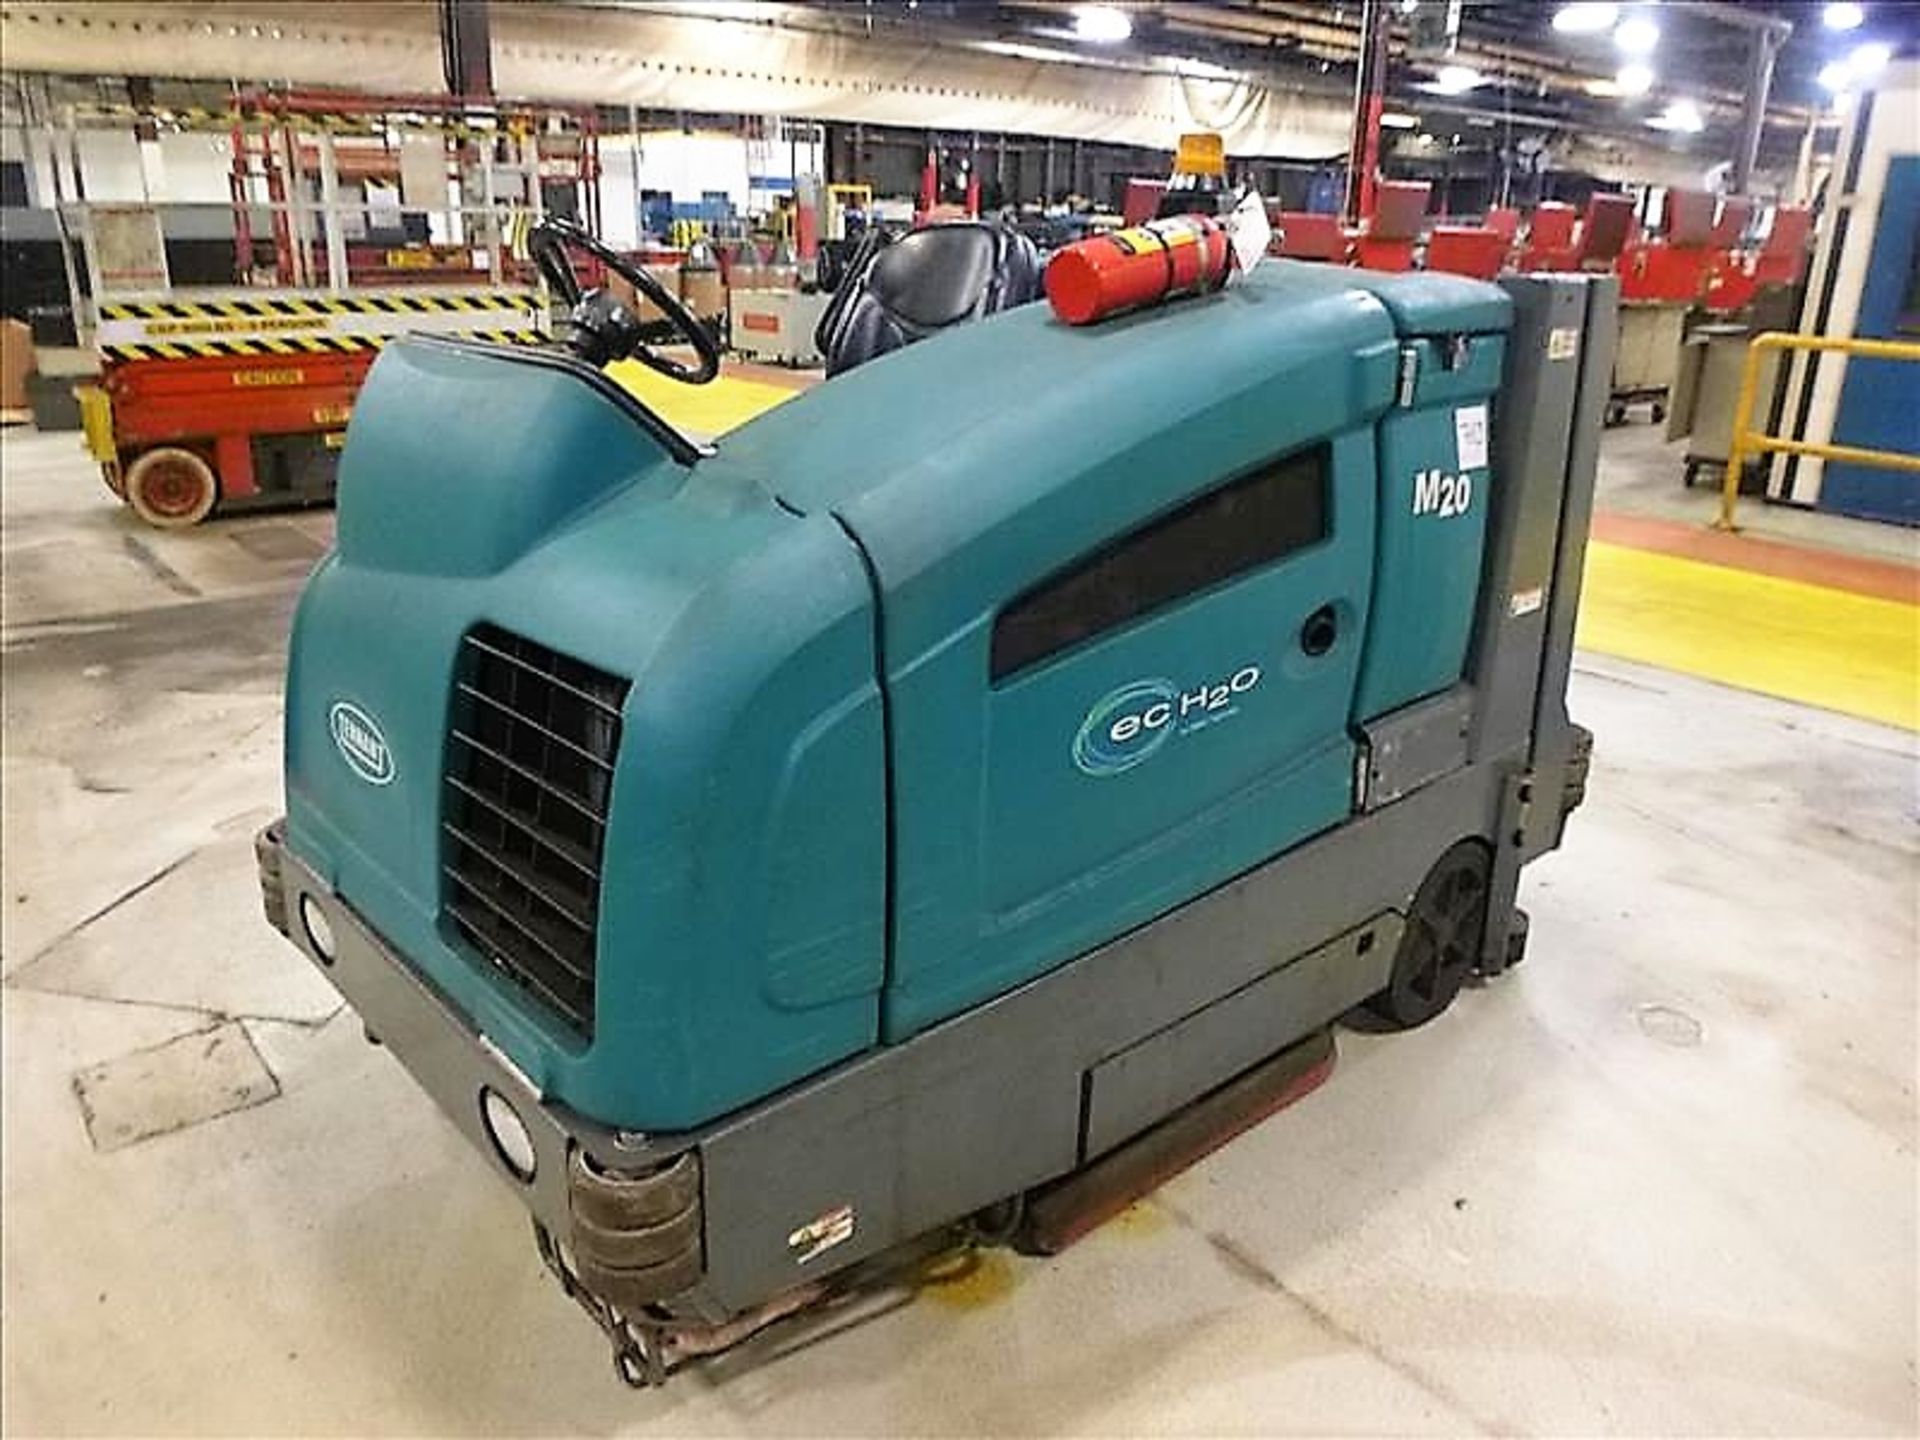 2013 TENNANT M20 Elec Sweeper/Scrubber, s/n M20-6016, Meter Reads 5944 hrs. - Image 3 of 14